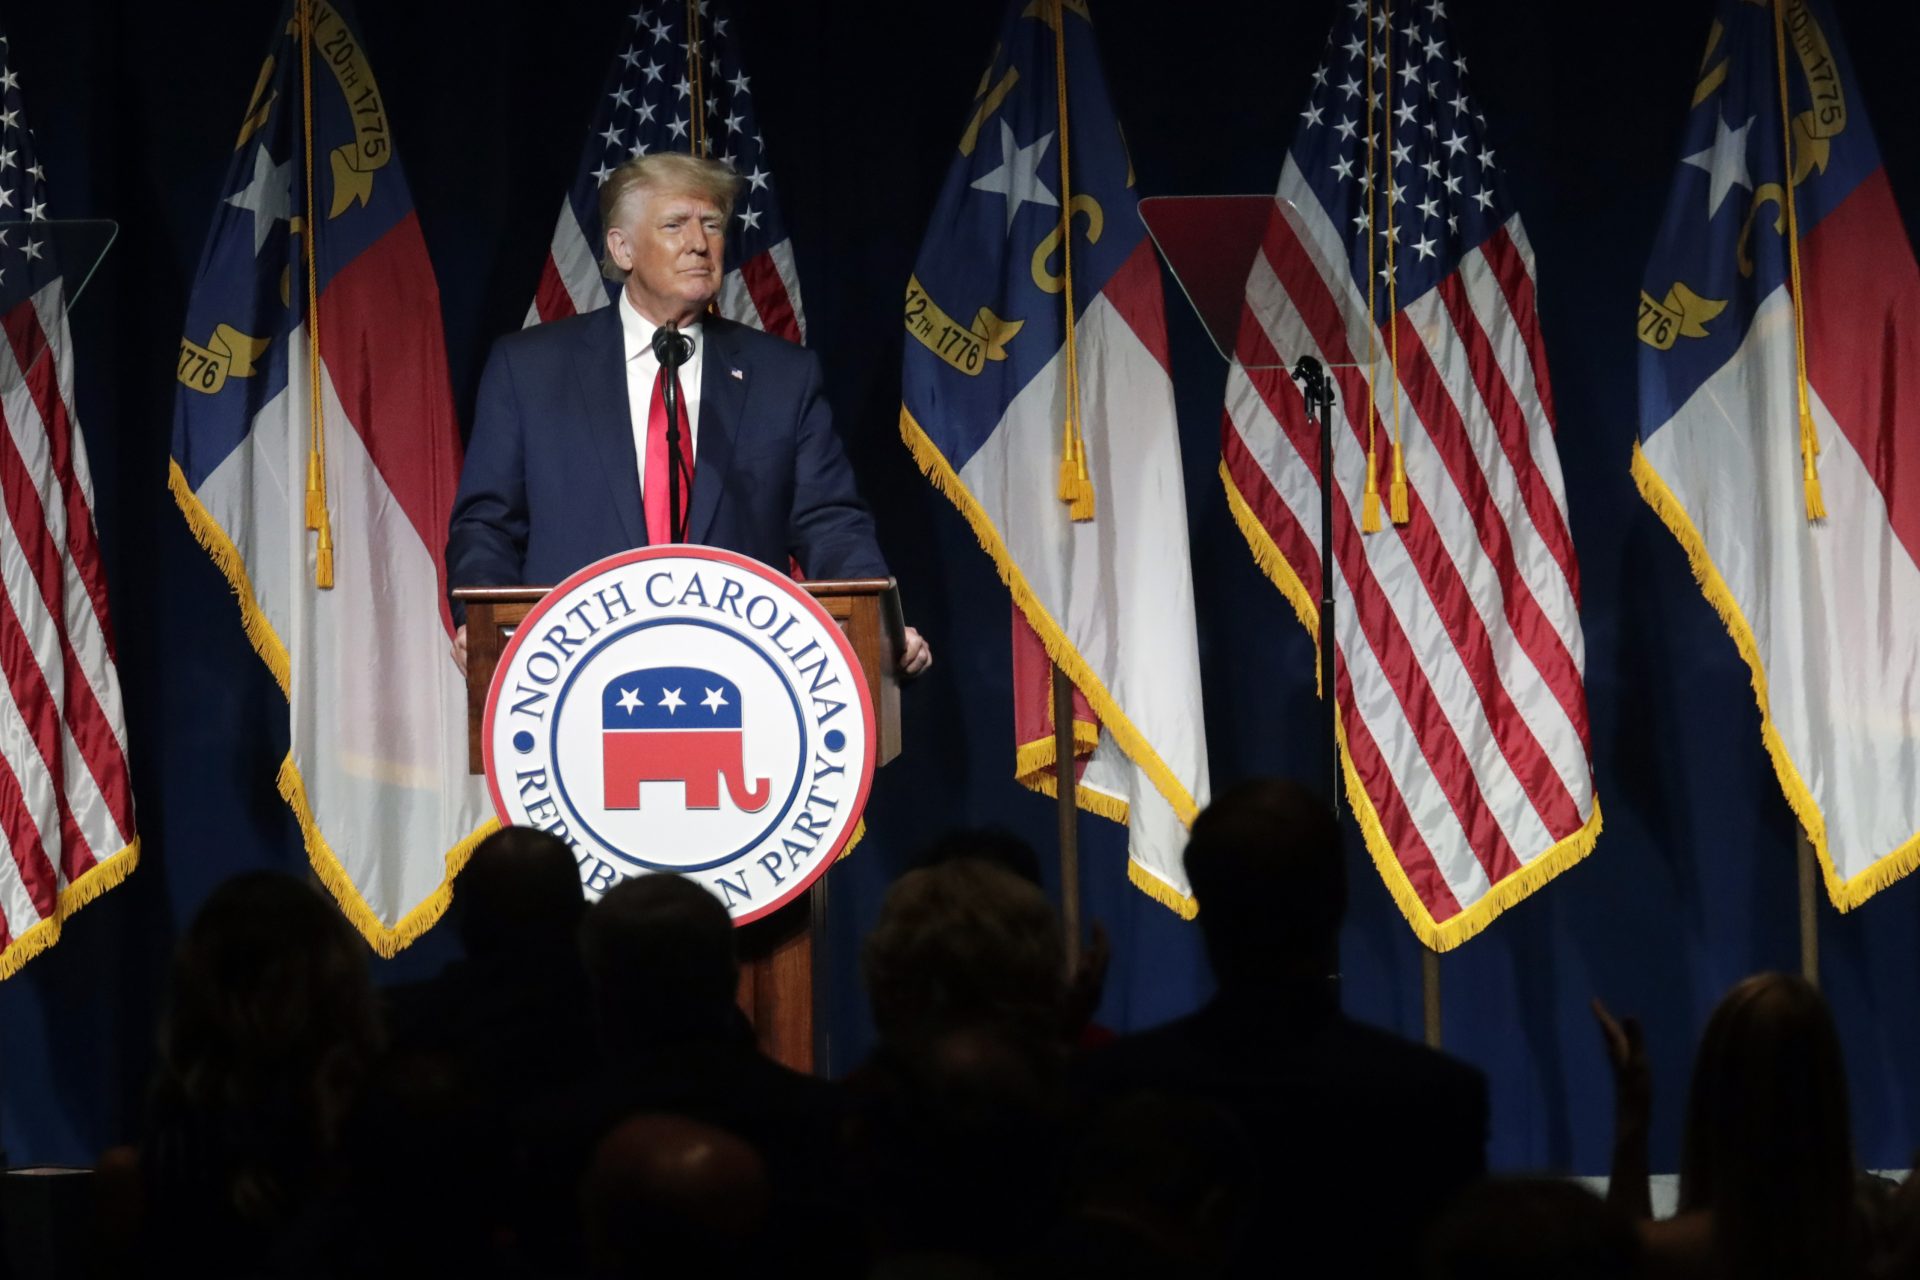 Former President Donald Trump speaks at the North Carolina Republican Convention Saturday, June 5, 2021, in Greenville, N.C.